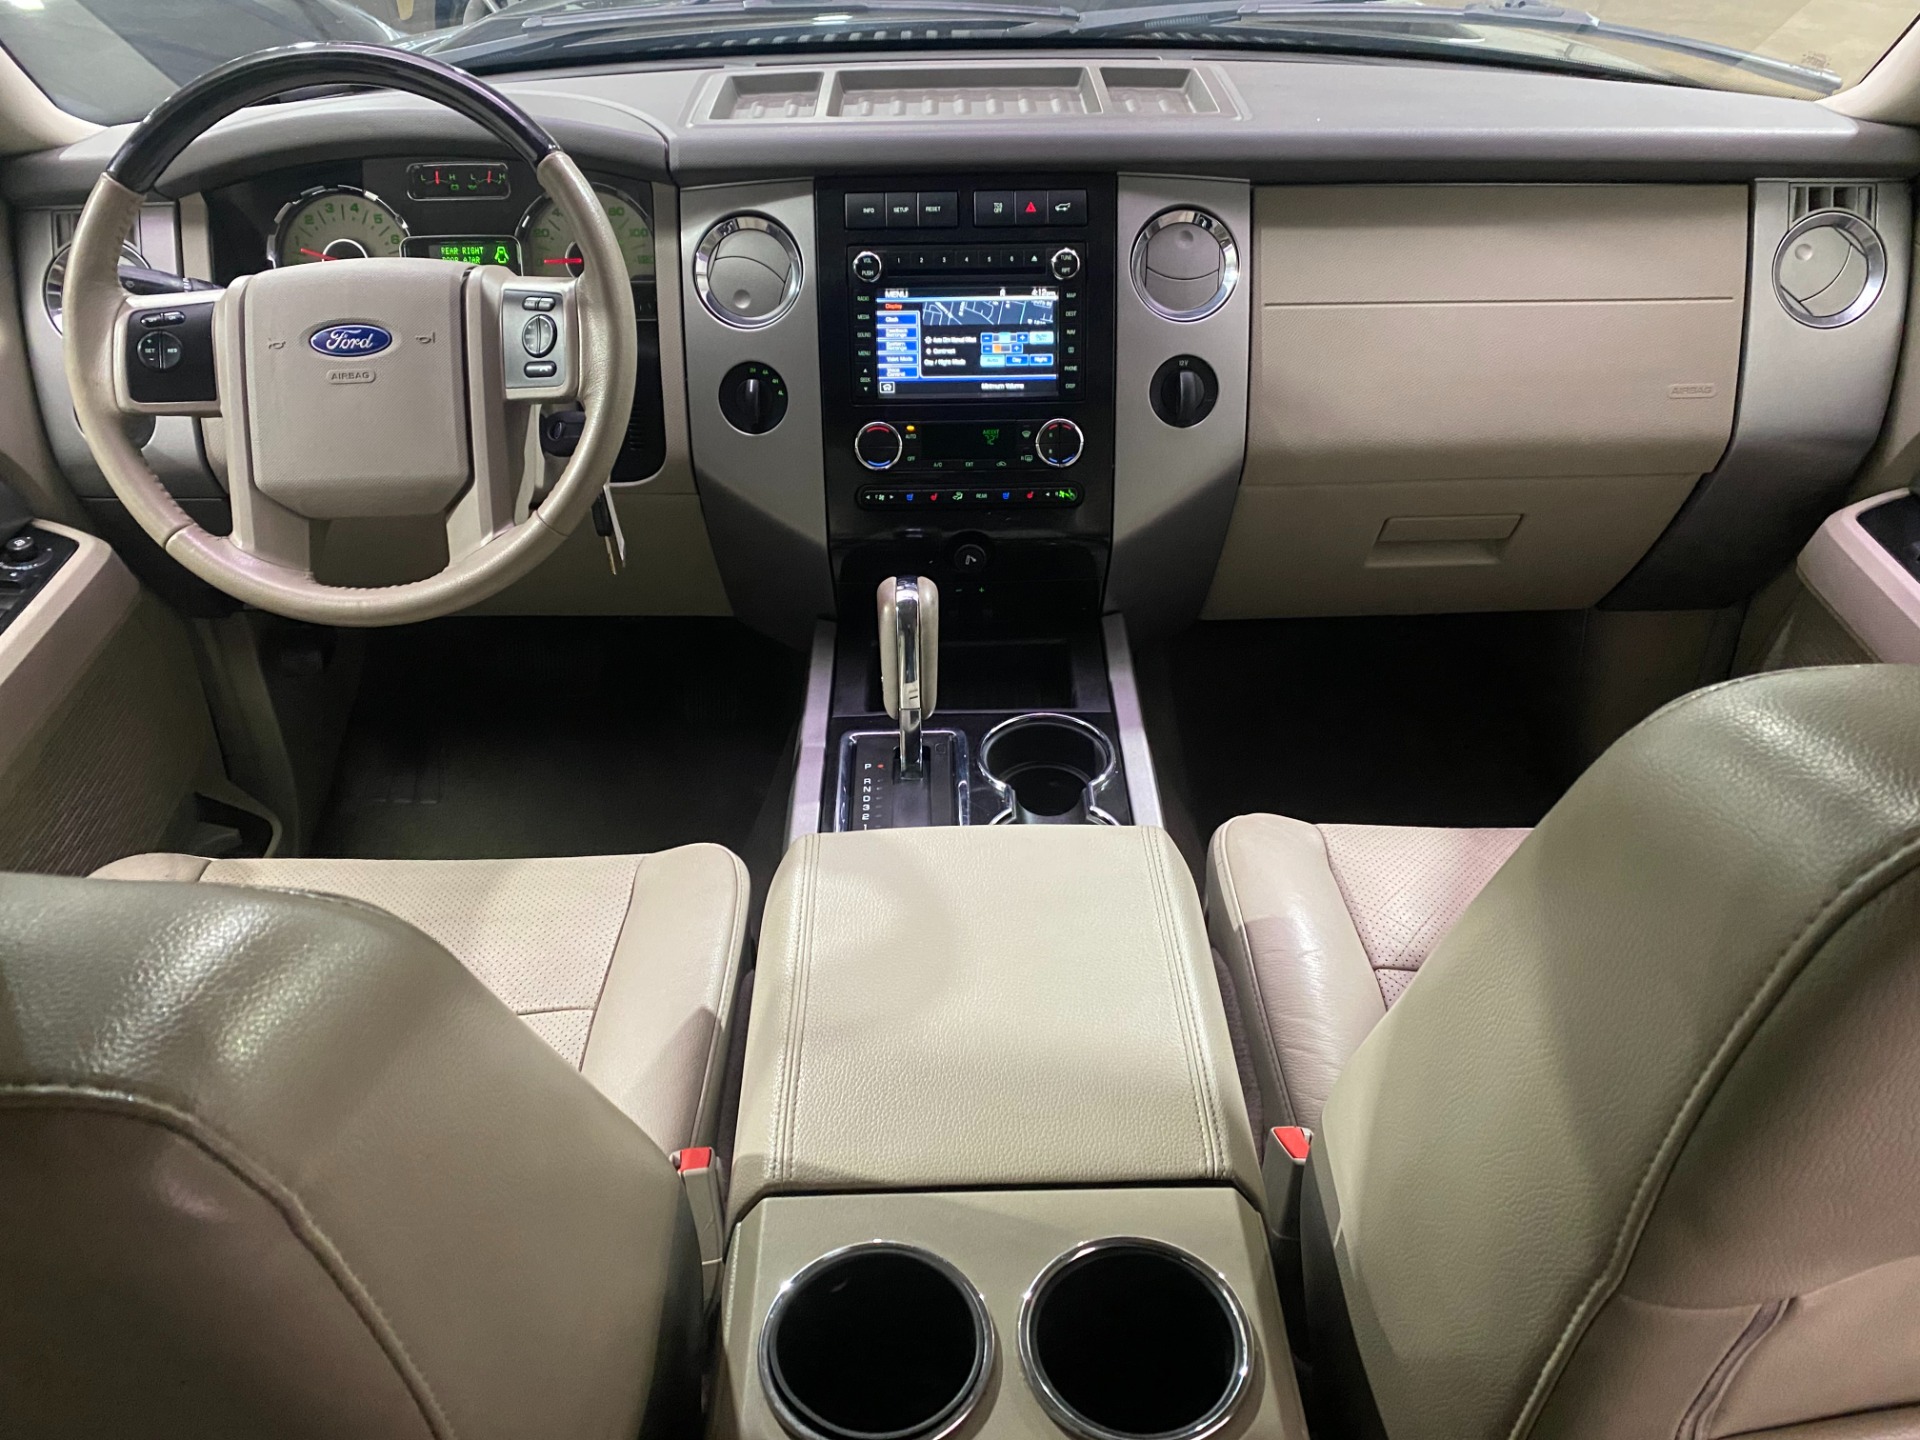 2013 Ford Expedition EL Limited 4X4 Stock # MCE948 for sale near Alsip, IL  | IL Ford Dealer